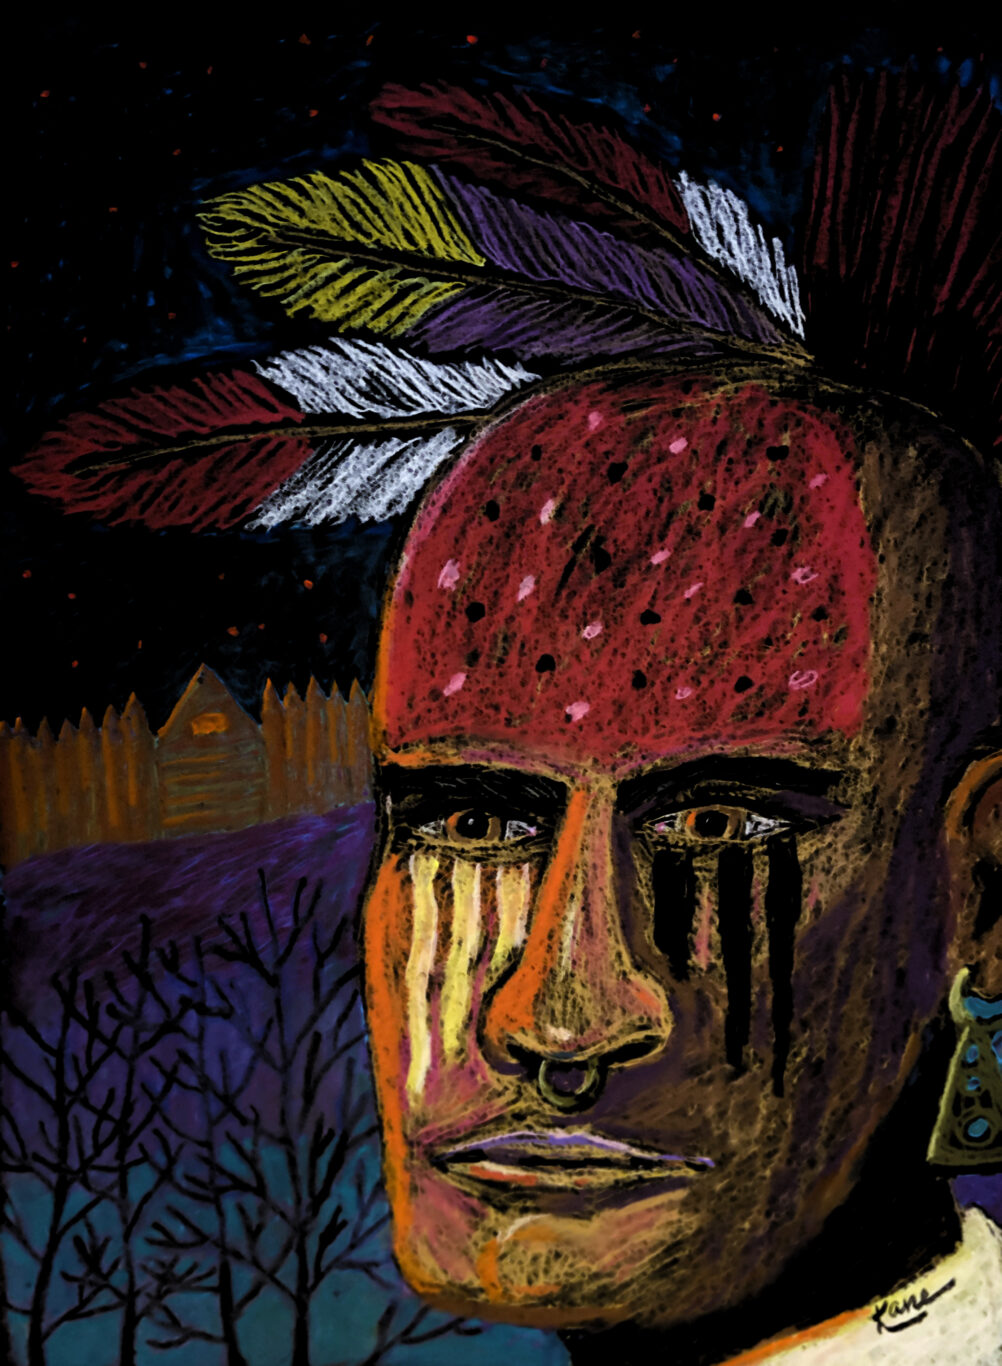 Artwork titled "Another Fort for the Greedy Invaders." Shows an Indian with feathers and war paint with a fort in the background.